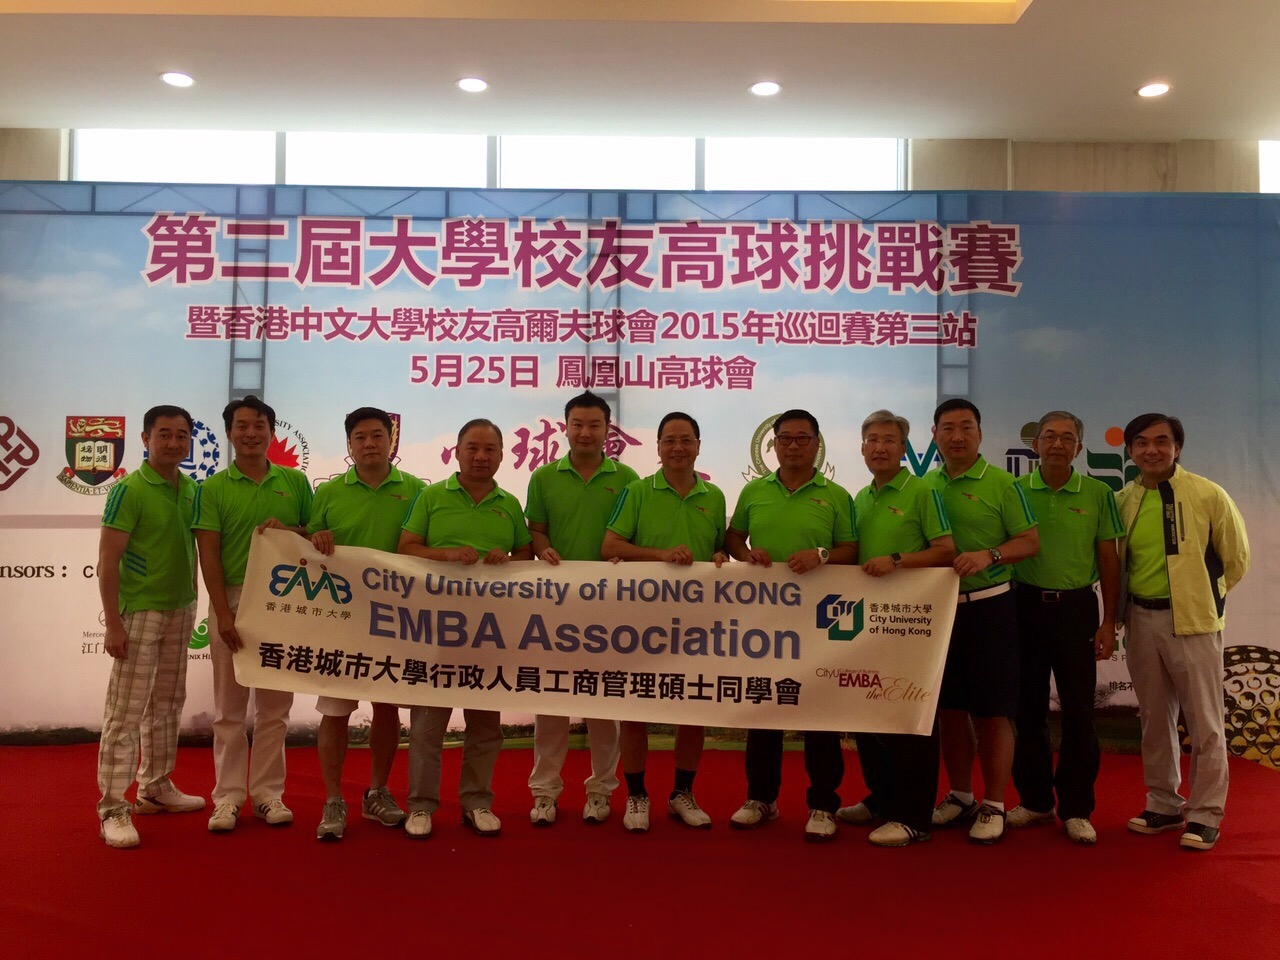 2015 2nd Inter-University Alumni Golf Competition (hosted by CUHKAGA)